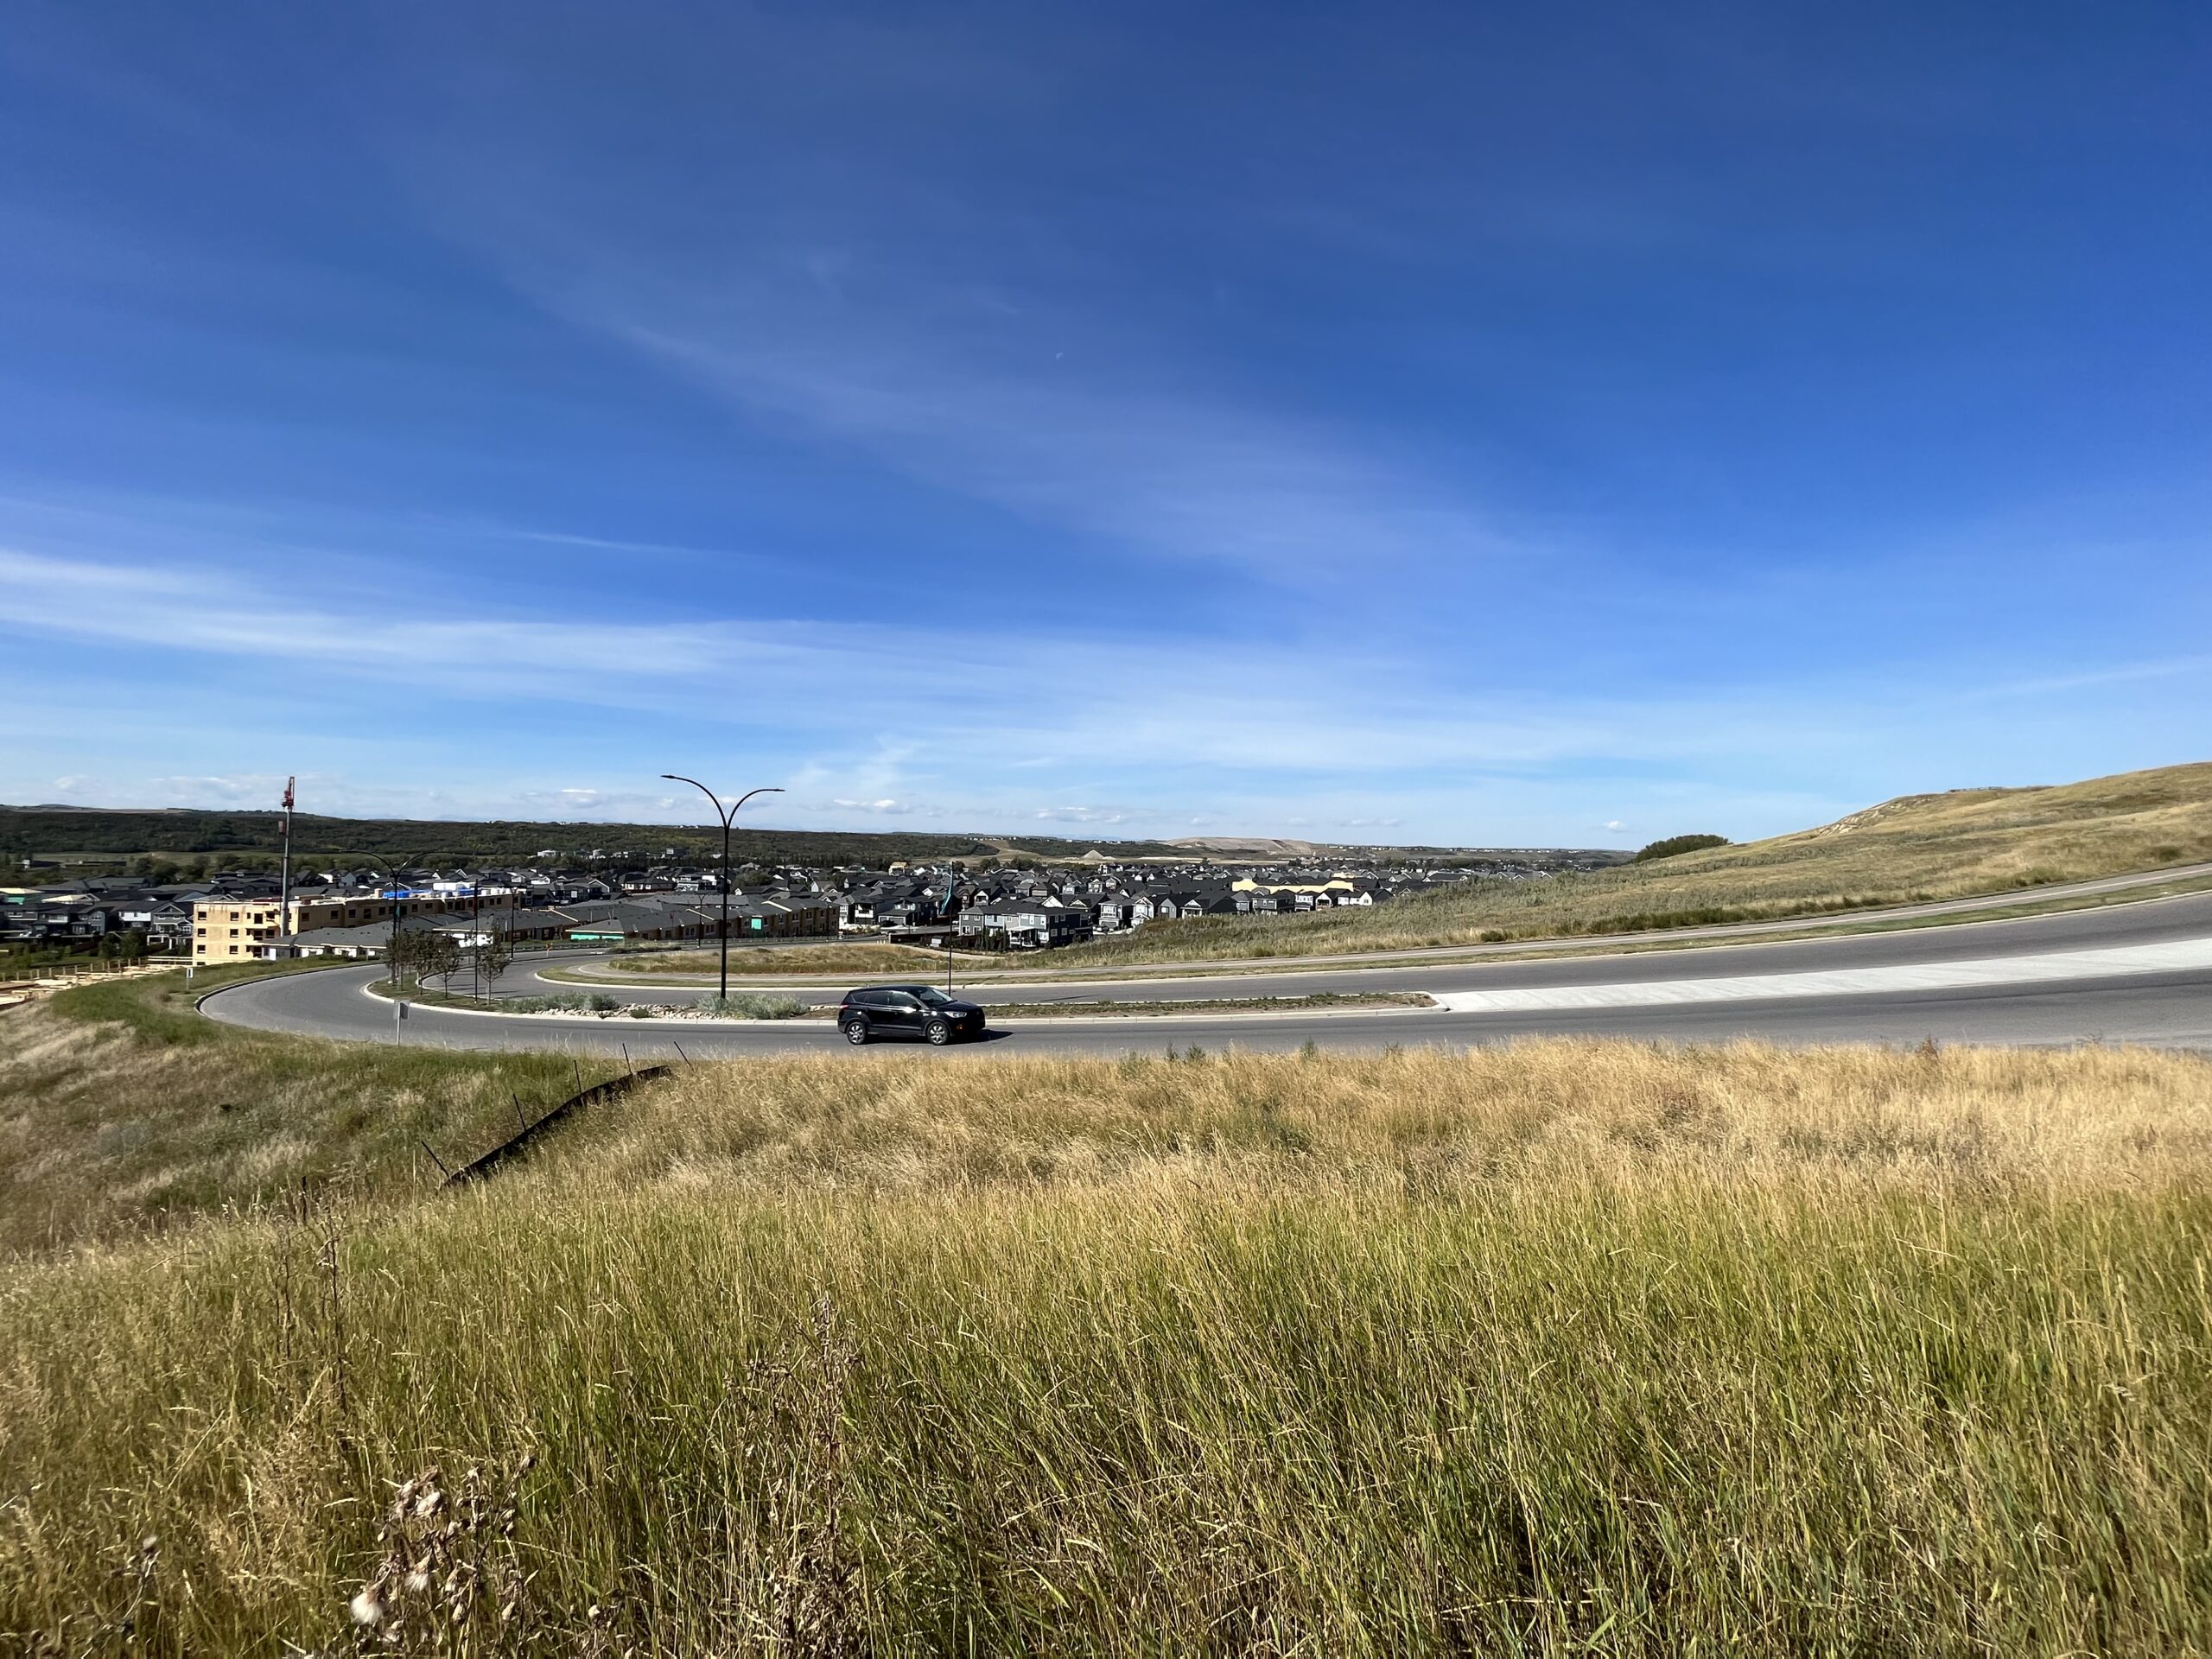 One example of Calgary's population growth: suburbs in the south.